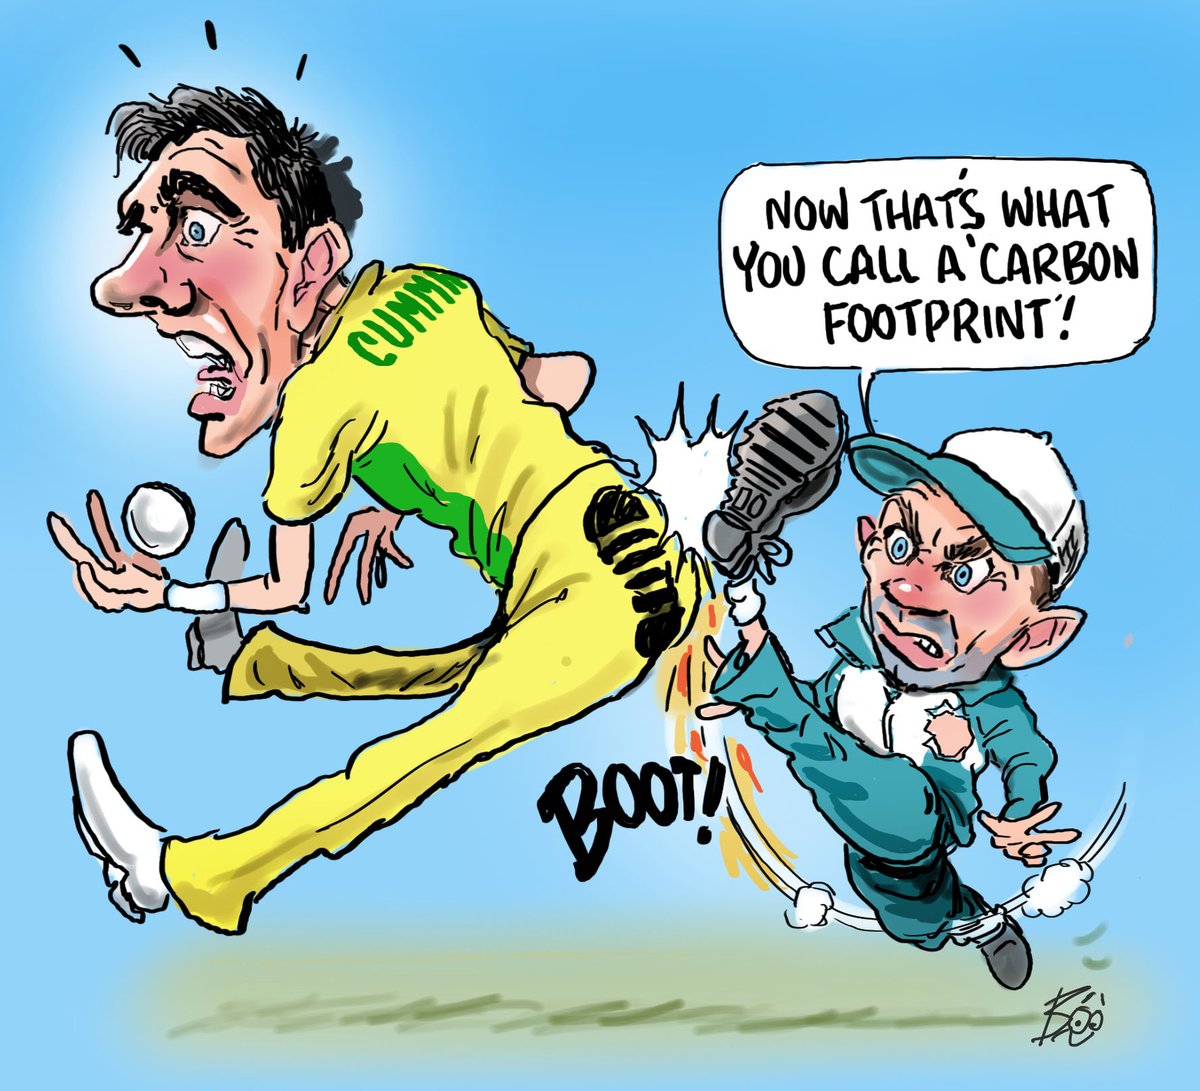 Rising temperatures, Gas omissions and hot air. Global warming's got nothing on the australian cricket scene at the moment. A taste of my weekly sports toon's @telegraph_sport @BenHorne8 @craddock_cmail #justinlanger #patcummins #AUSvENG @FoxCricket